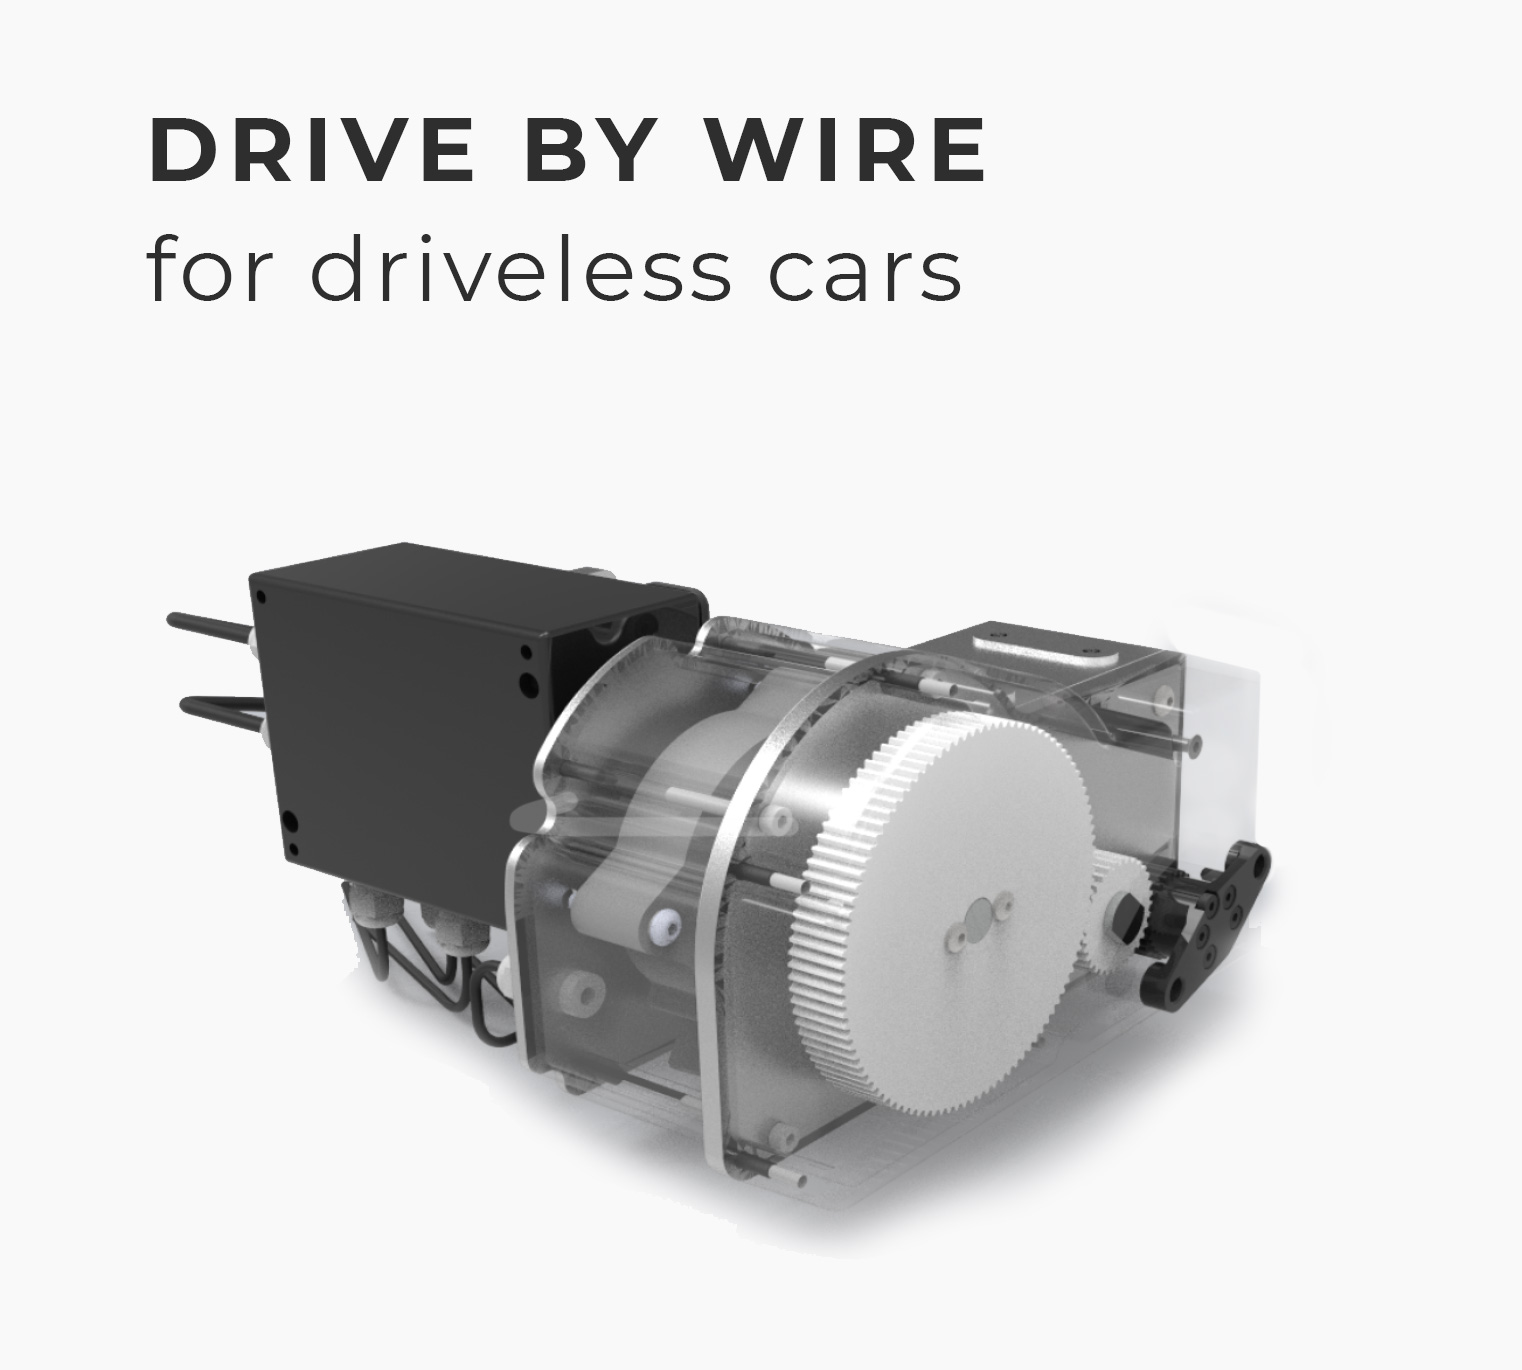 Drive by wire